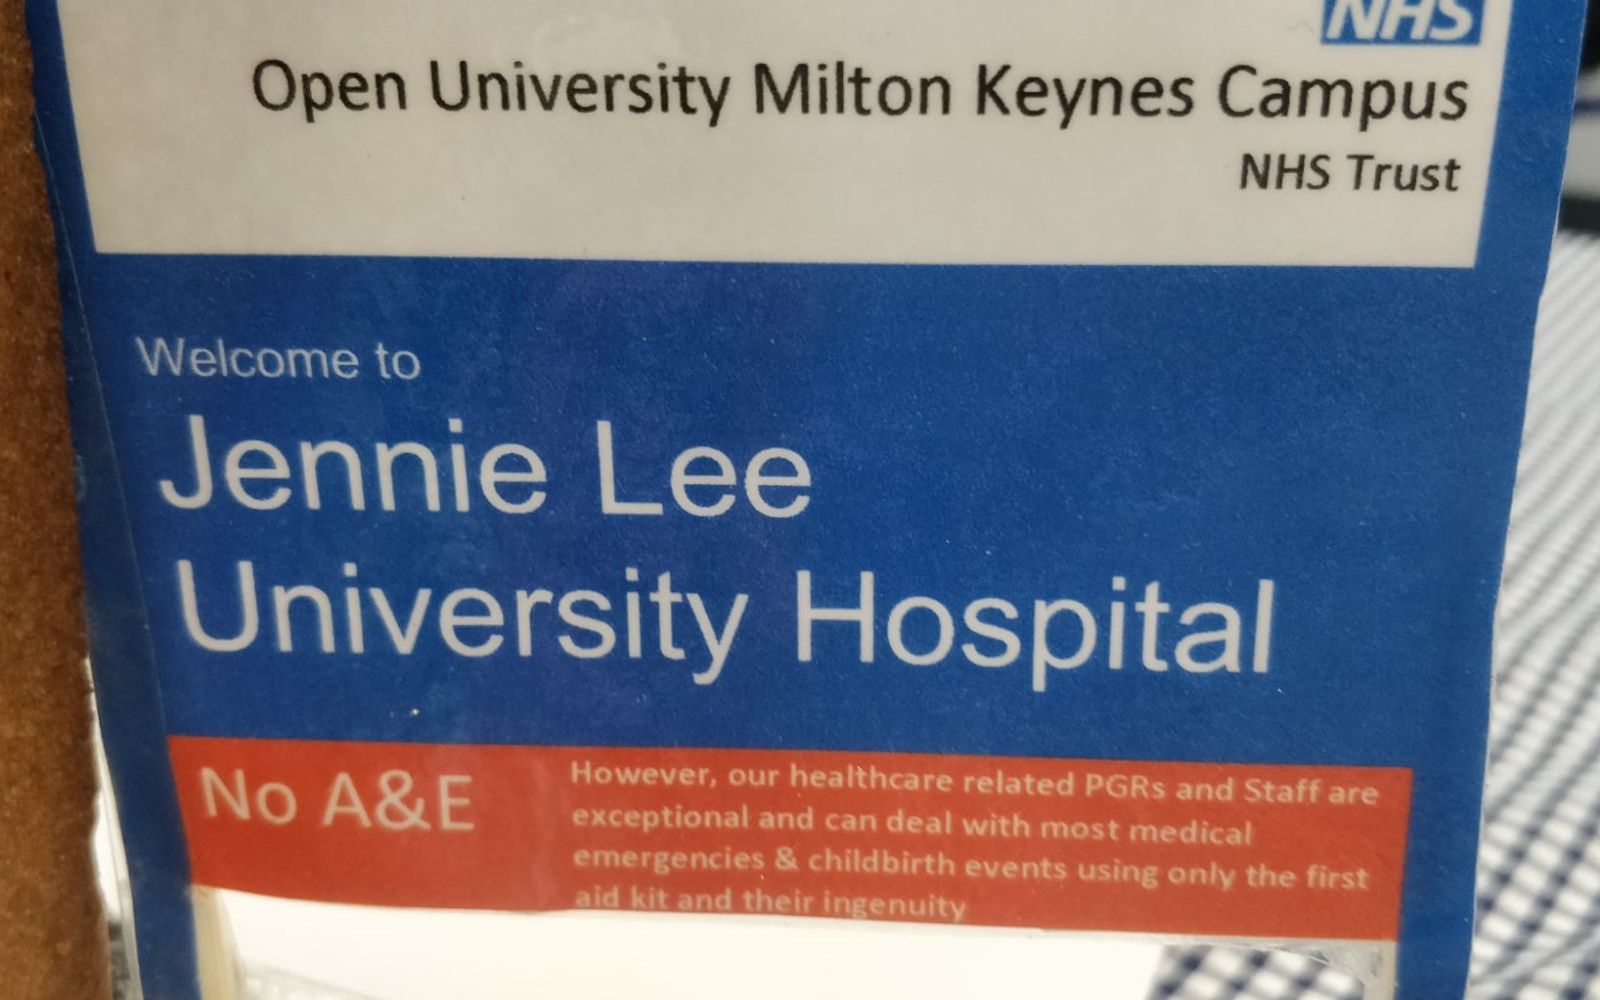 Close up detail on the hospital sign incorporated into Anna Madeley's bake. The sign is a replica of an NHS Hospital sign and reads, "Open University Milton Keynes Campus, NHS Trust, Welcome to Jennie Lee University Hospital, No A&E."